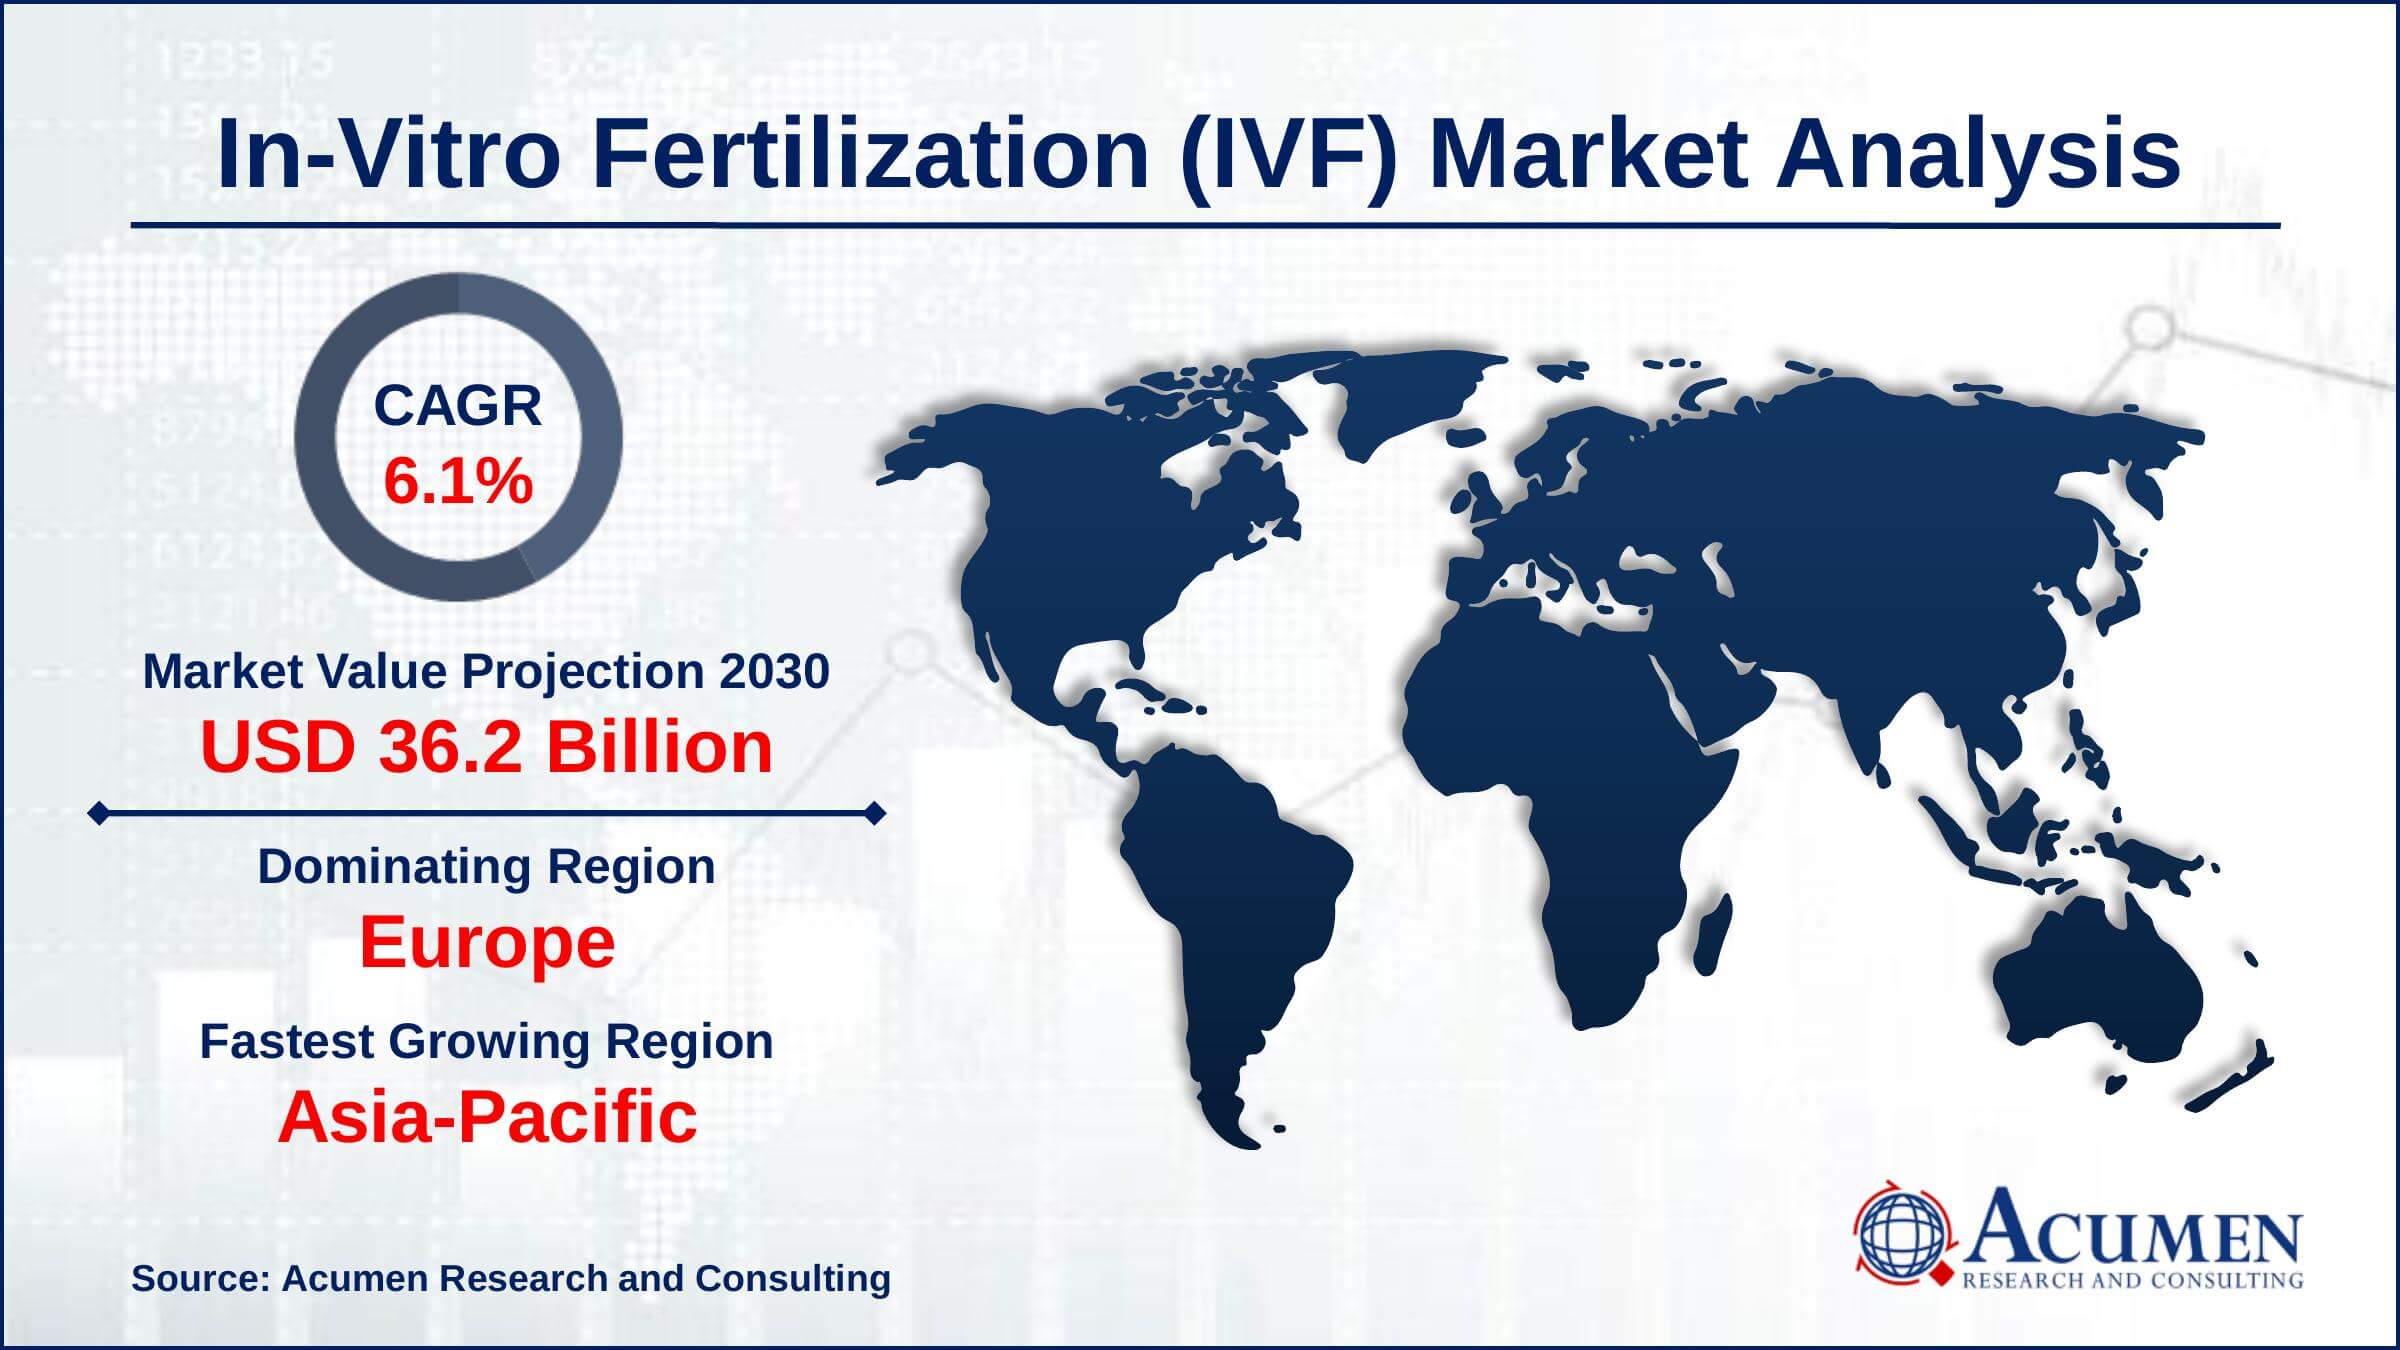 Europe region led with more than 37.4% of in-vitro fertilization market share in 2021